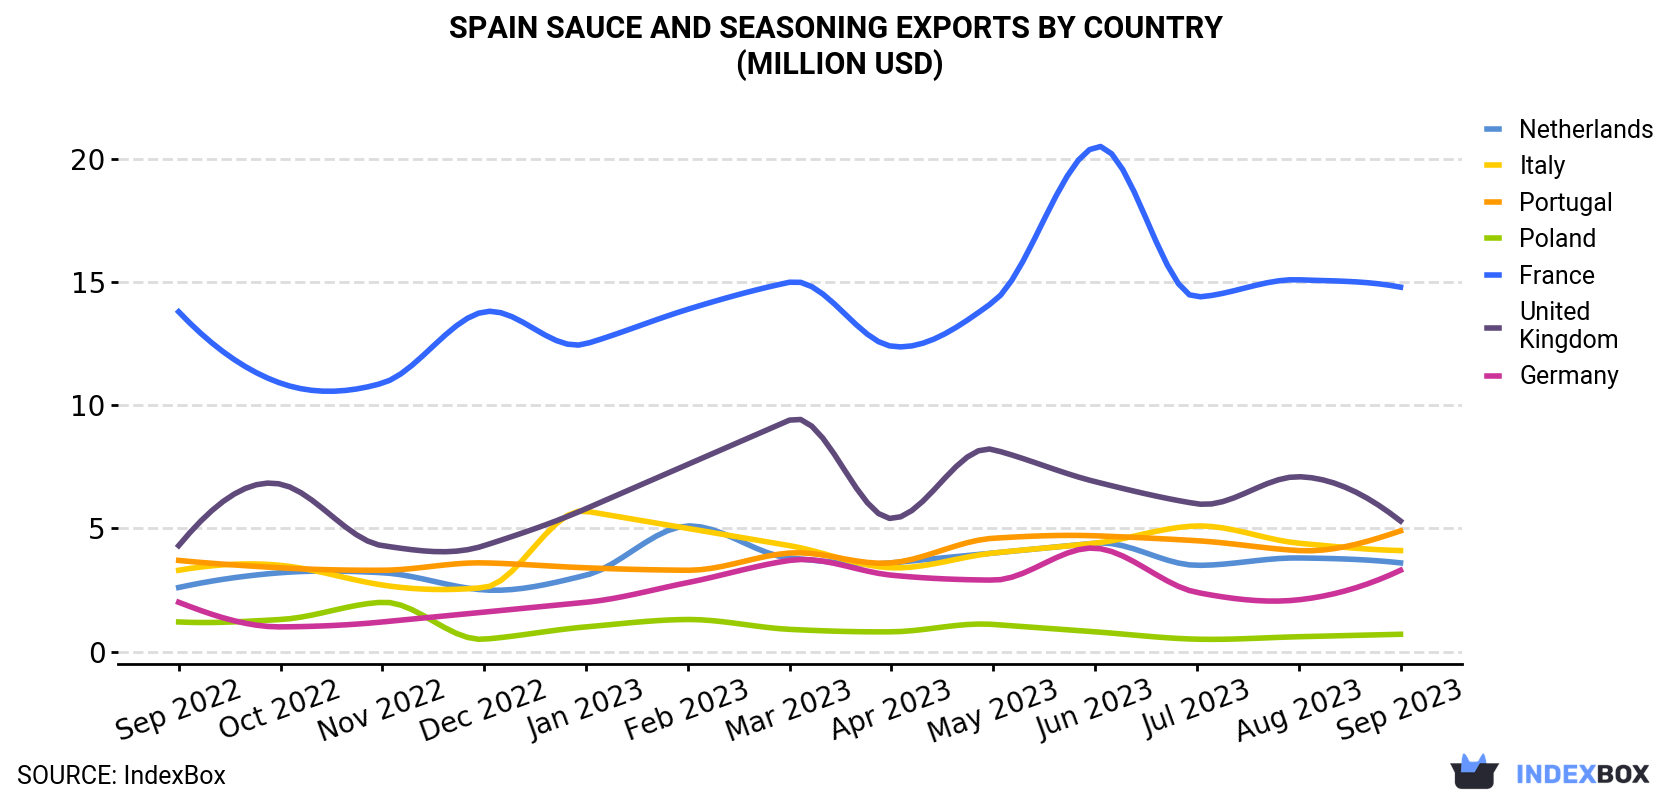 Spain Sauce and Seasoning Exports By Country (Million USD)